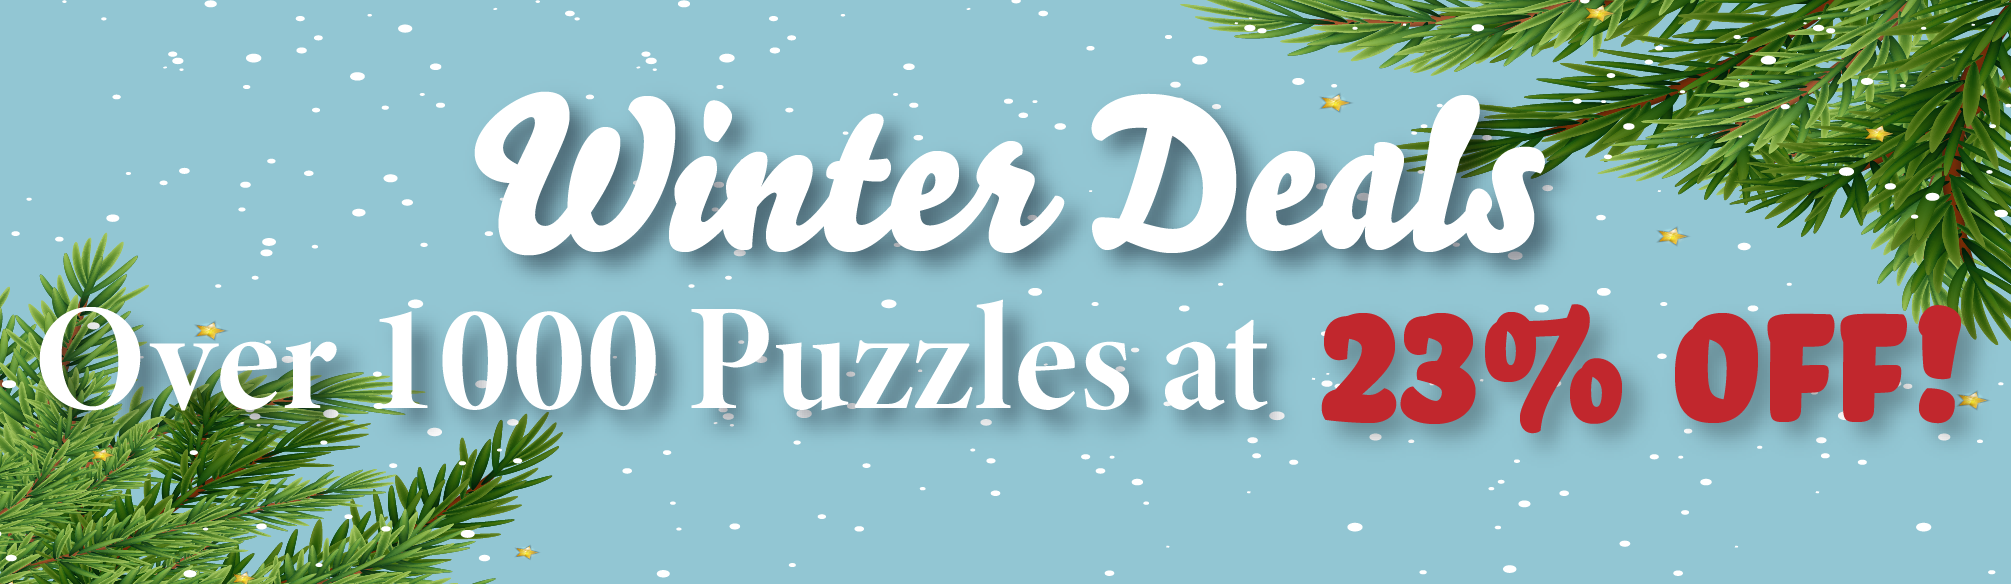 11/29-12/7 sale 23% puzzles Homepage